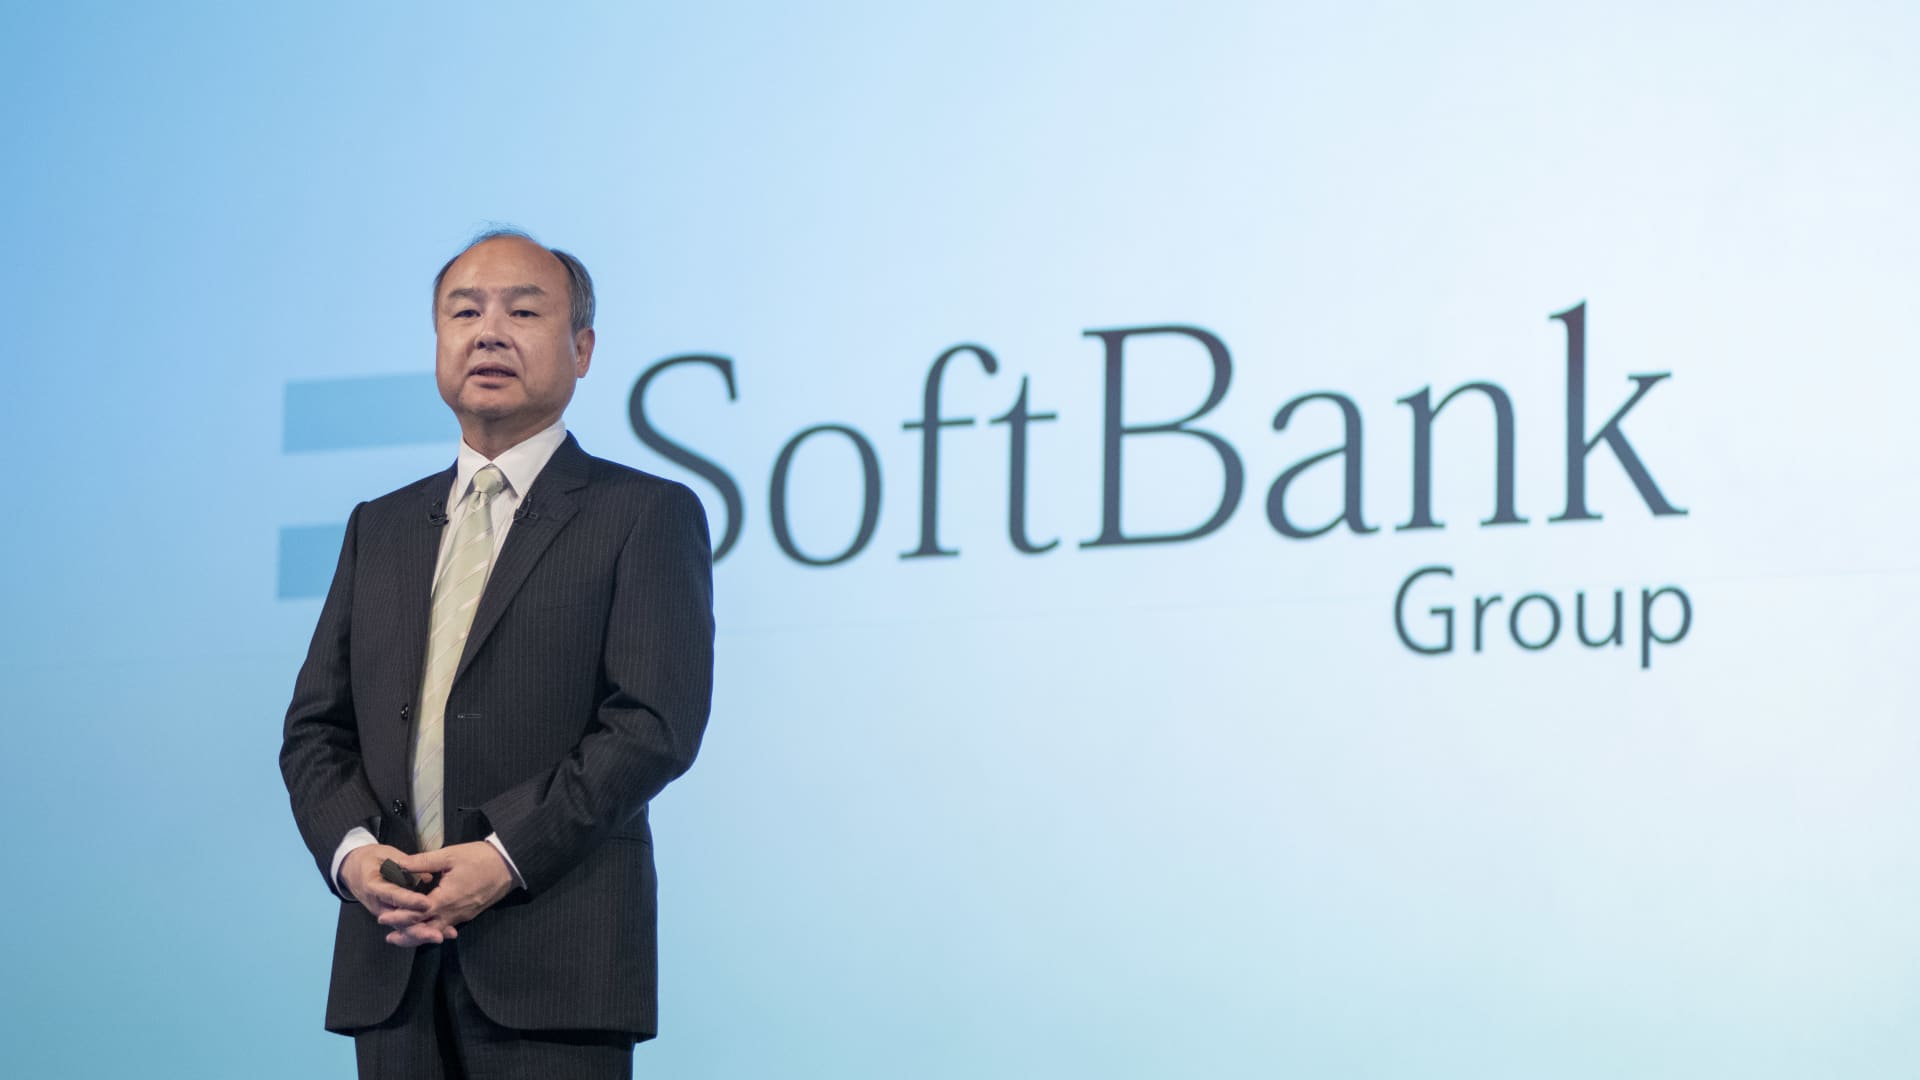 'Extremely regrettable': SoftBank hits back after S&P cuts credit rating further into junk